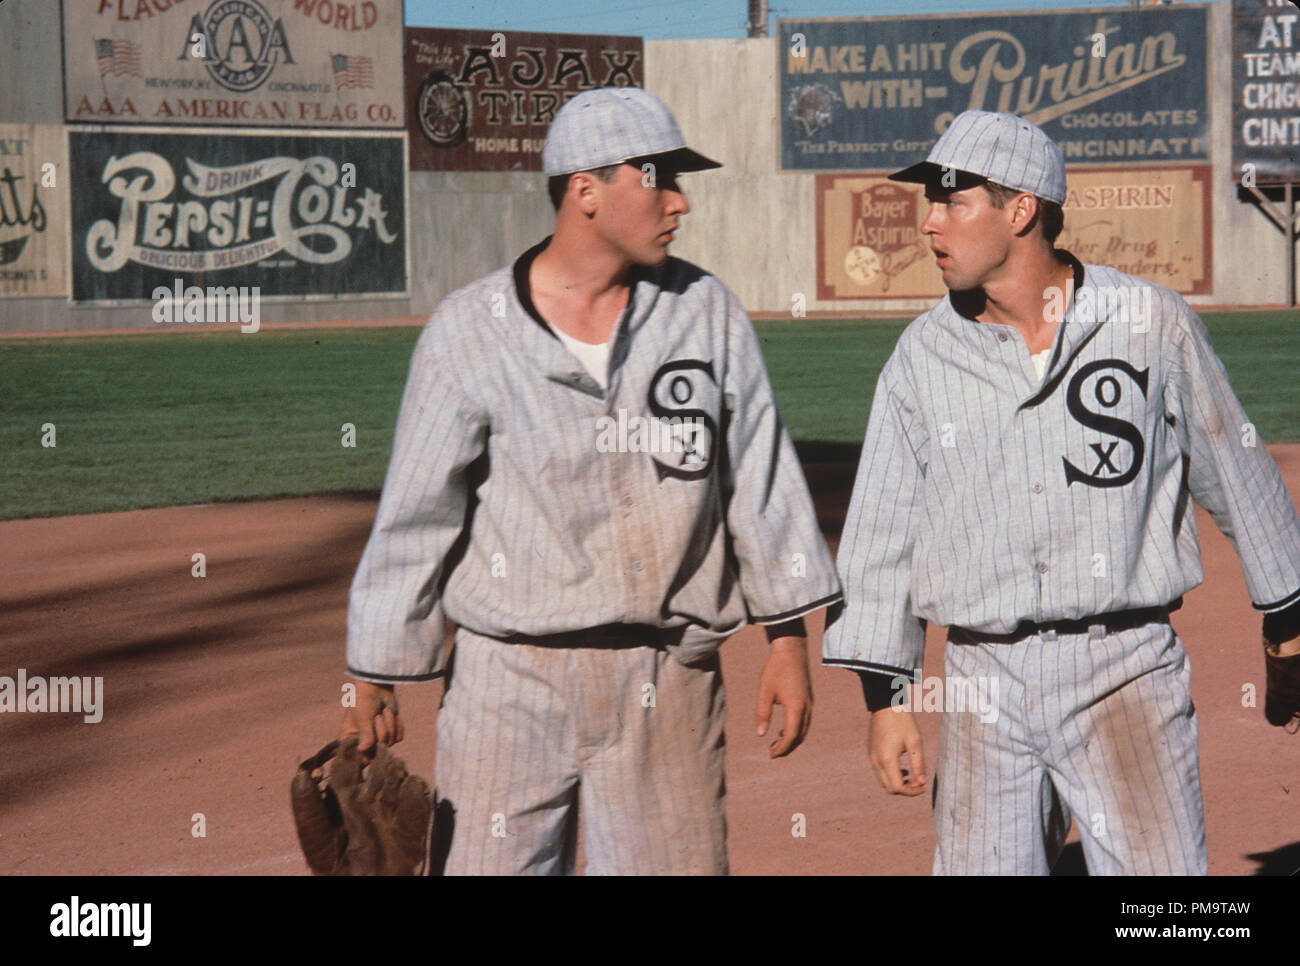 Studio Publicity Still from 'Eight Men Out' John Cusack, D.B. Sweeney © 1988 Orion Pictures Photo Credit: Bob Marshak   All Rights Reserved   File Reference # 31694218THA  For Editorial Use Only Stock Photo